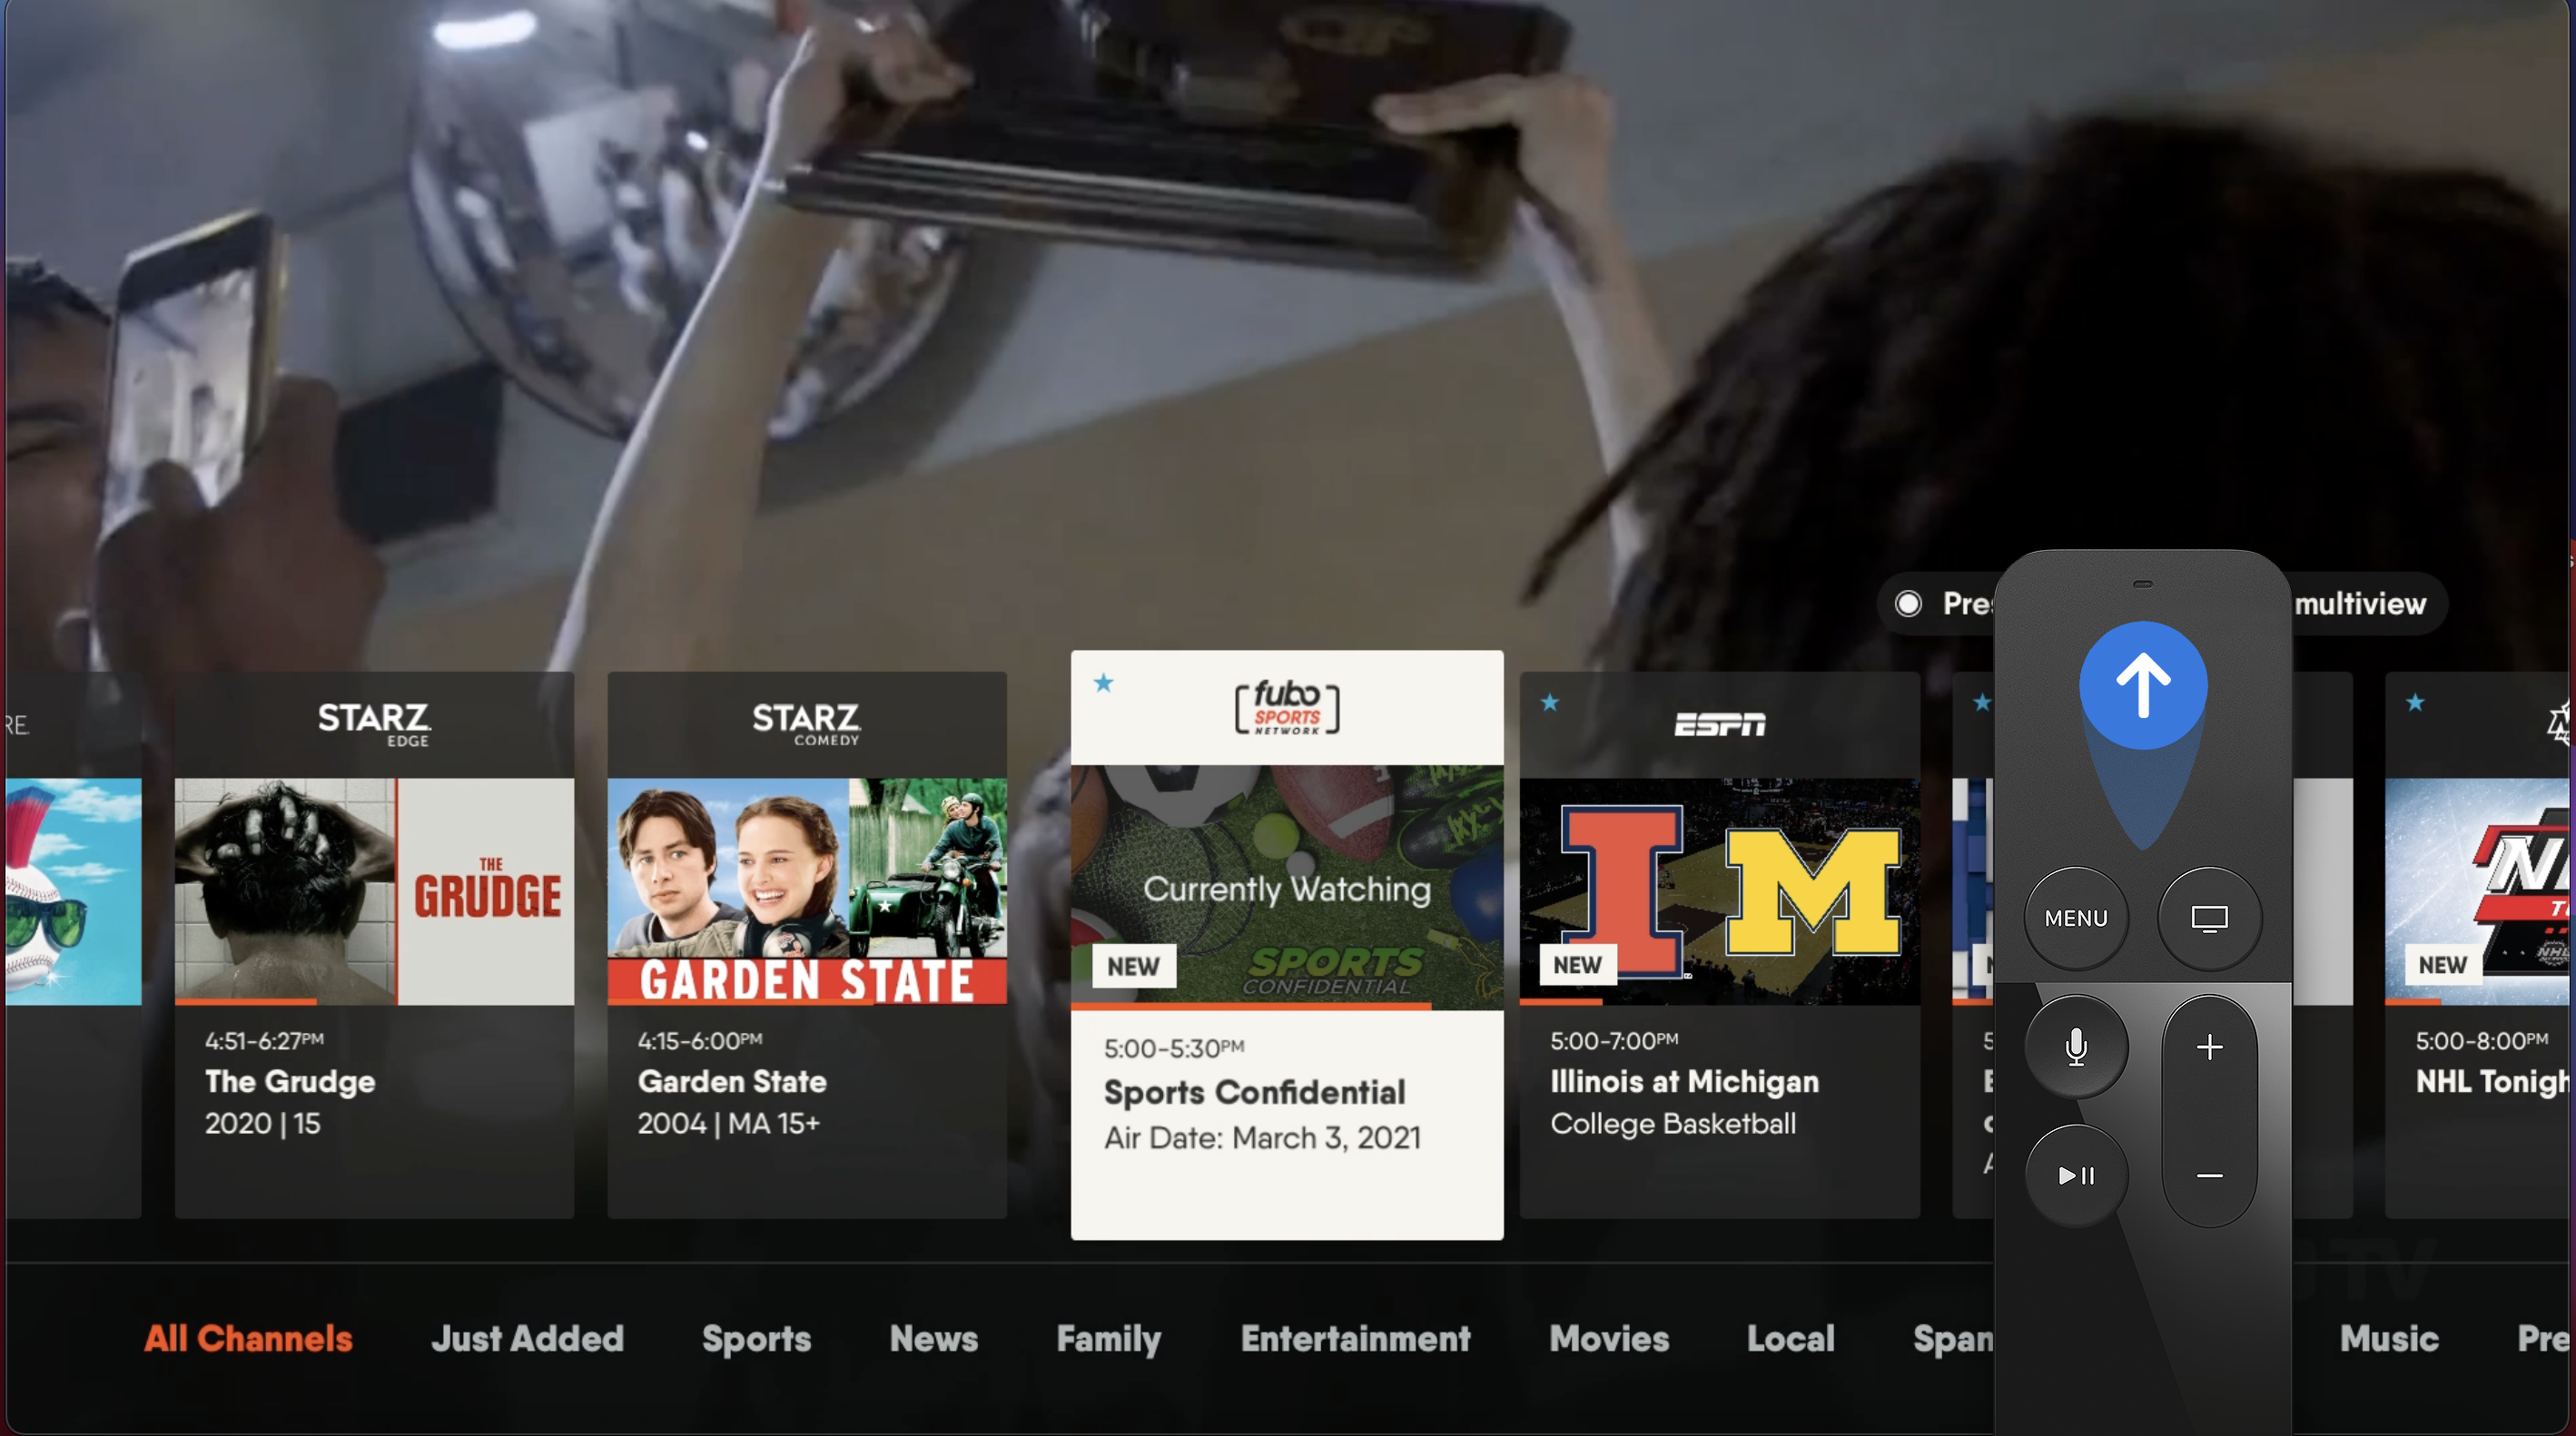 The browse while watching menu on the FuboTV app for Apple TV, accessible by swiping up on the touchpad